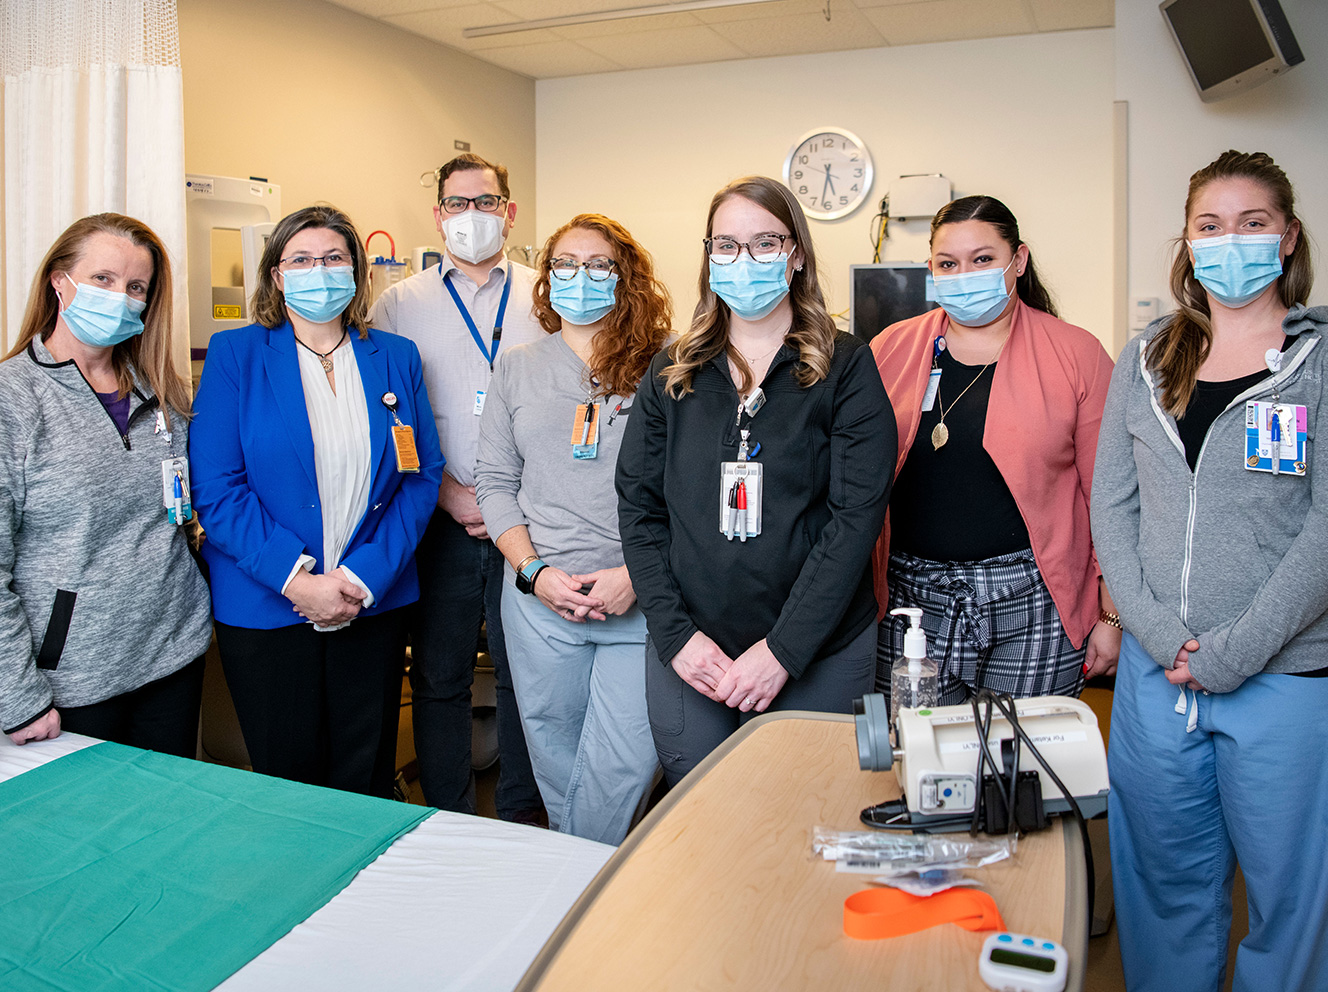 Cristina Cusin, MD, second from left, with several staff members of the IV Ketamine Clinic at Mass General.